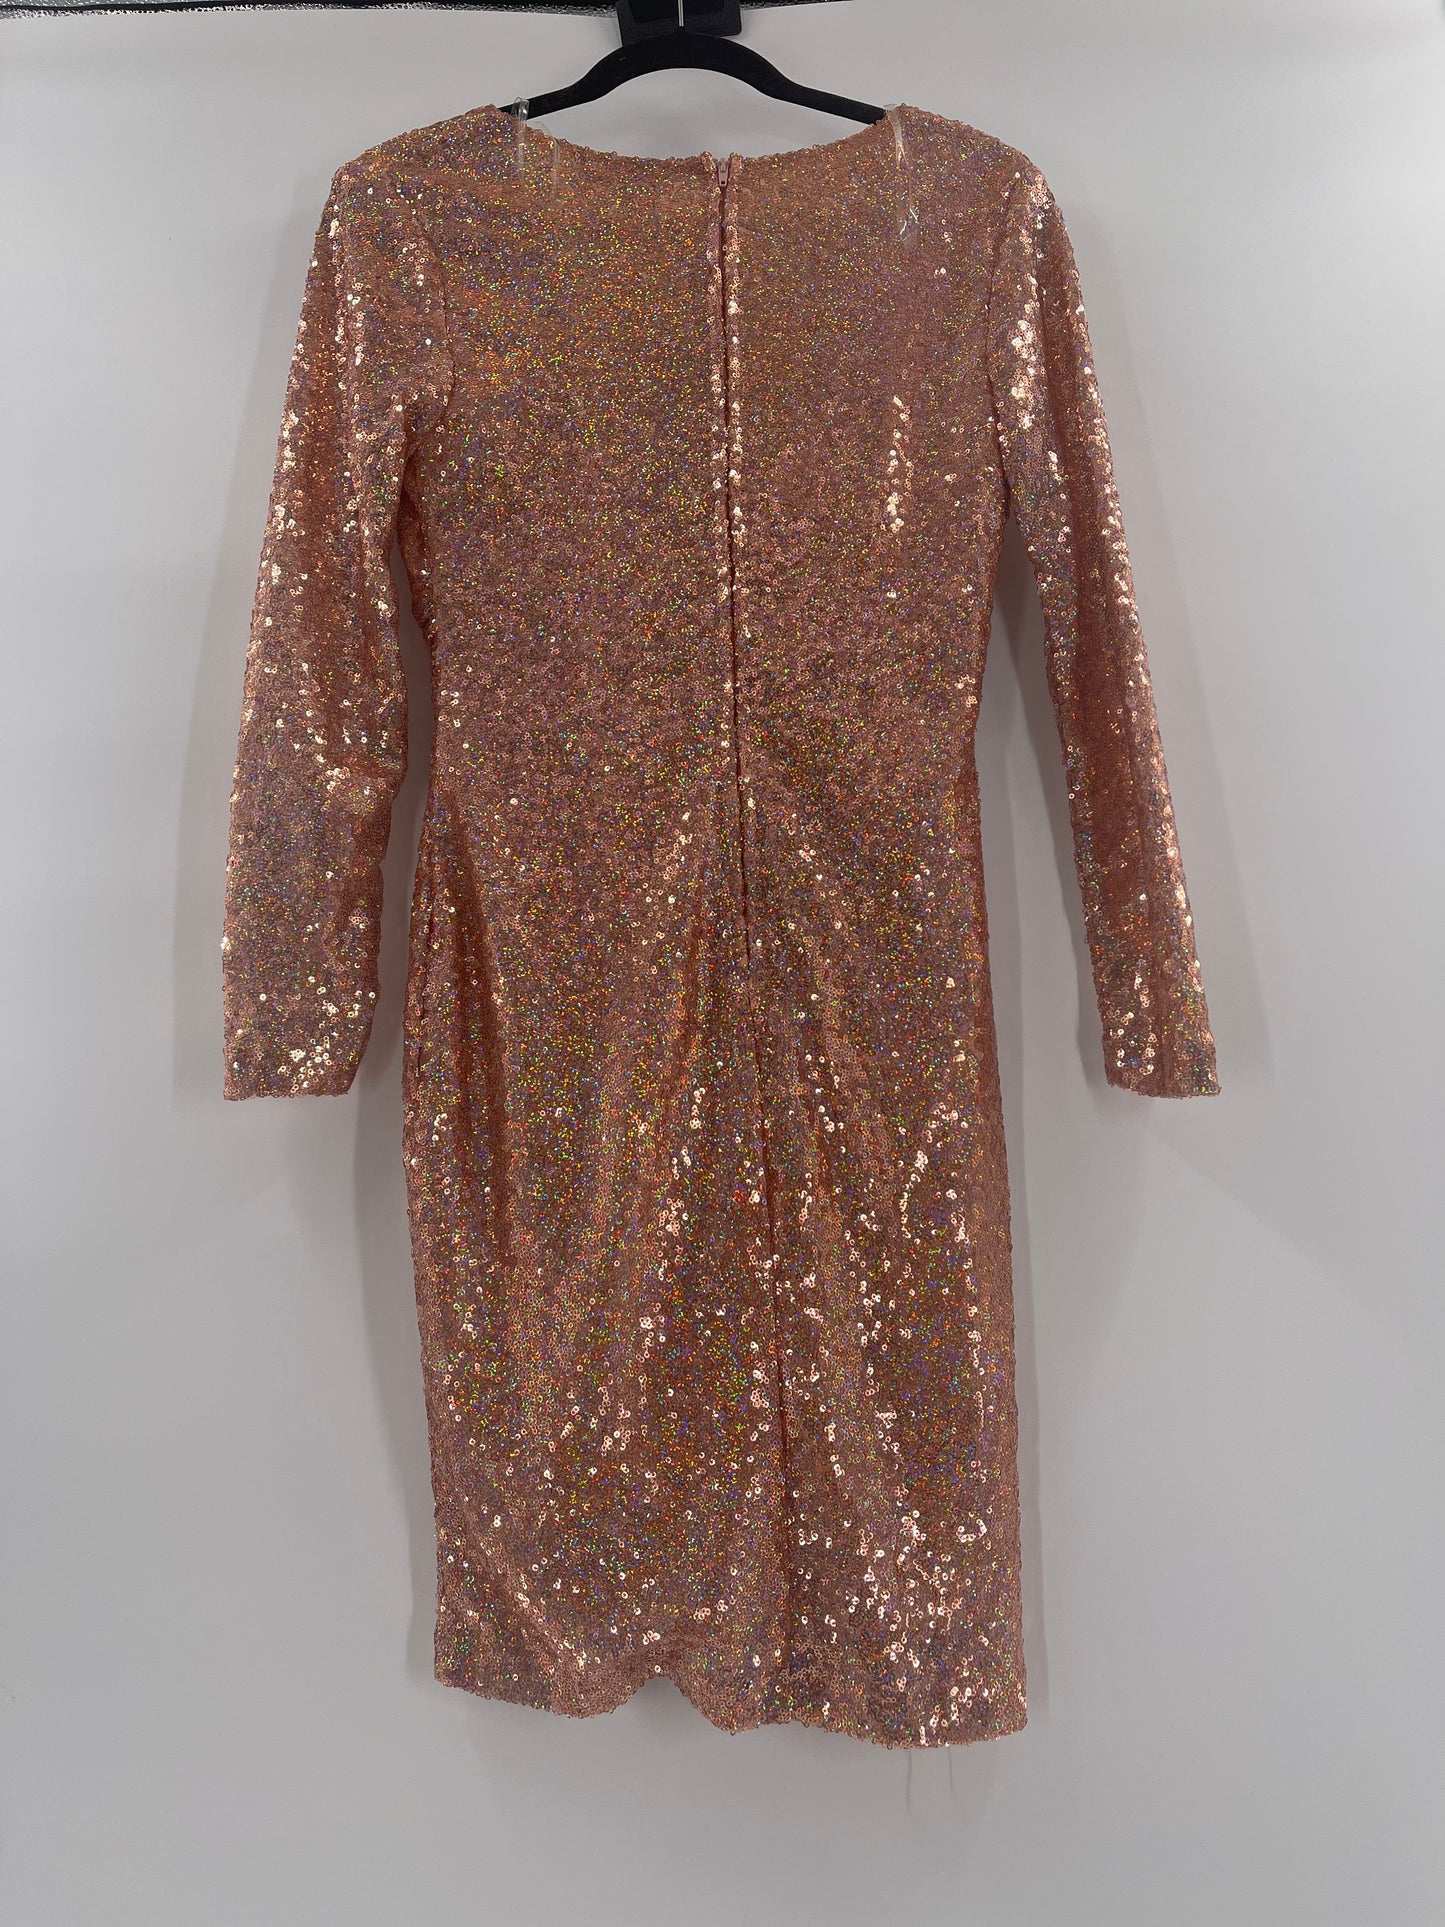 Charlotte Ruse Holographic Sequin Dress (Small)